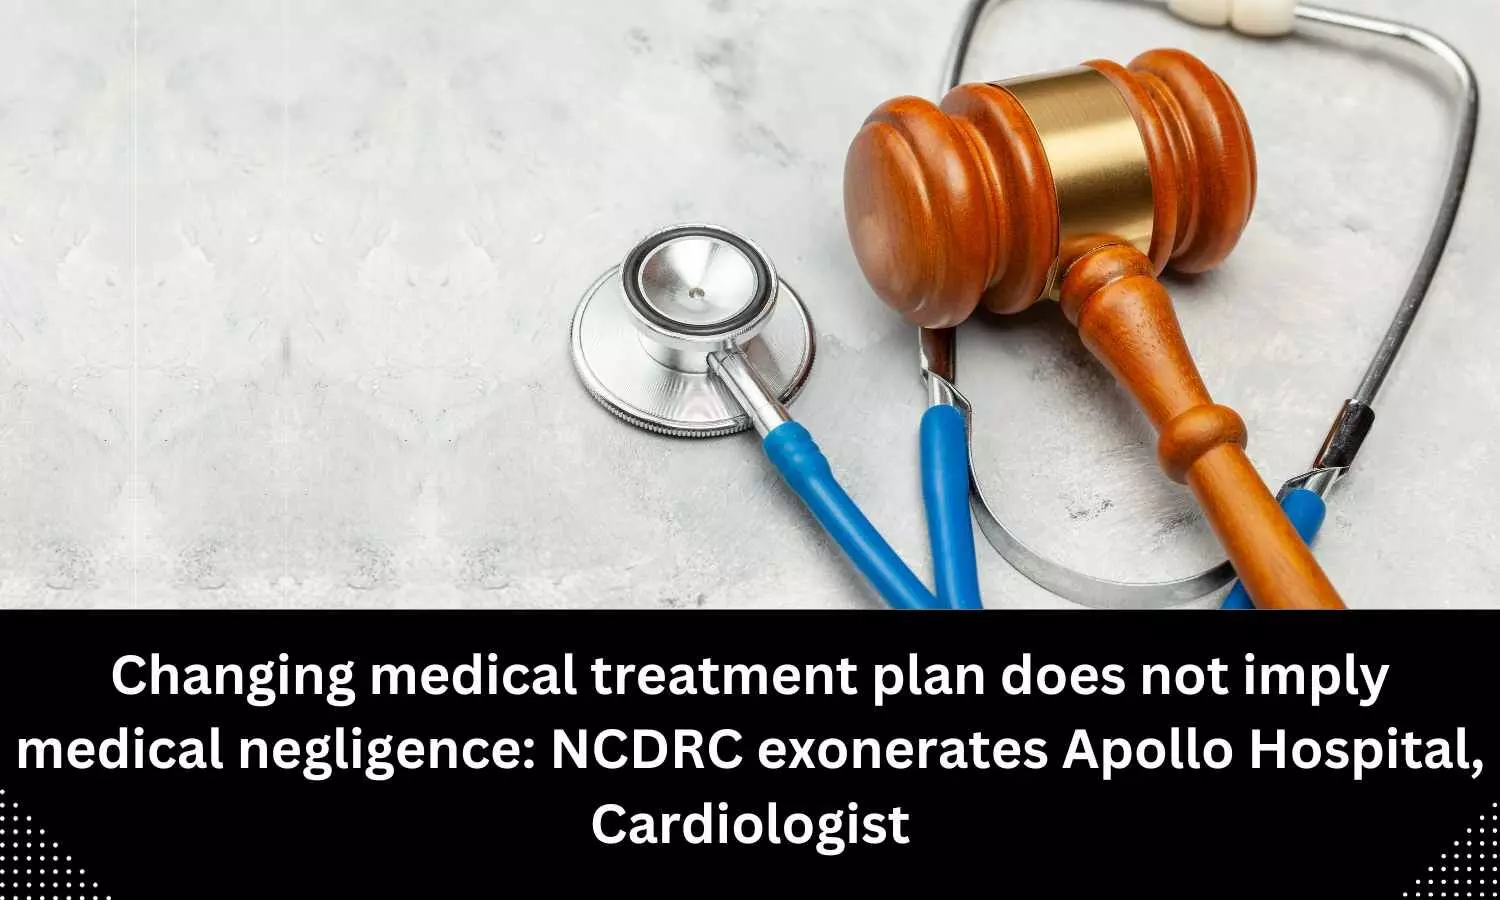 Changing medical treatment plan does not imply medical negligence: NCDRC exonerates Apollo Hospital, Cardiologist